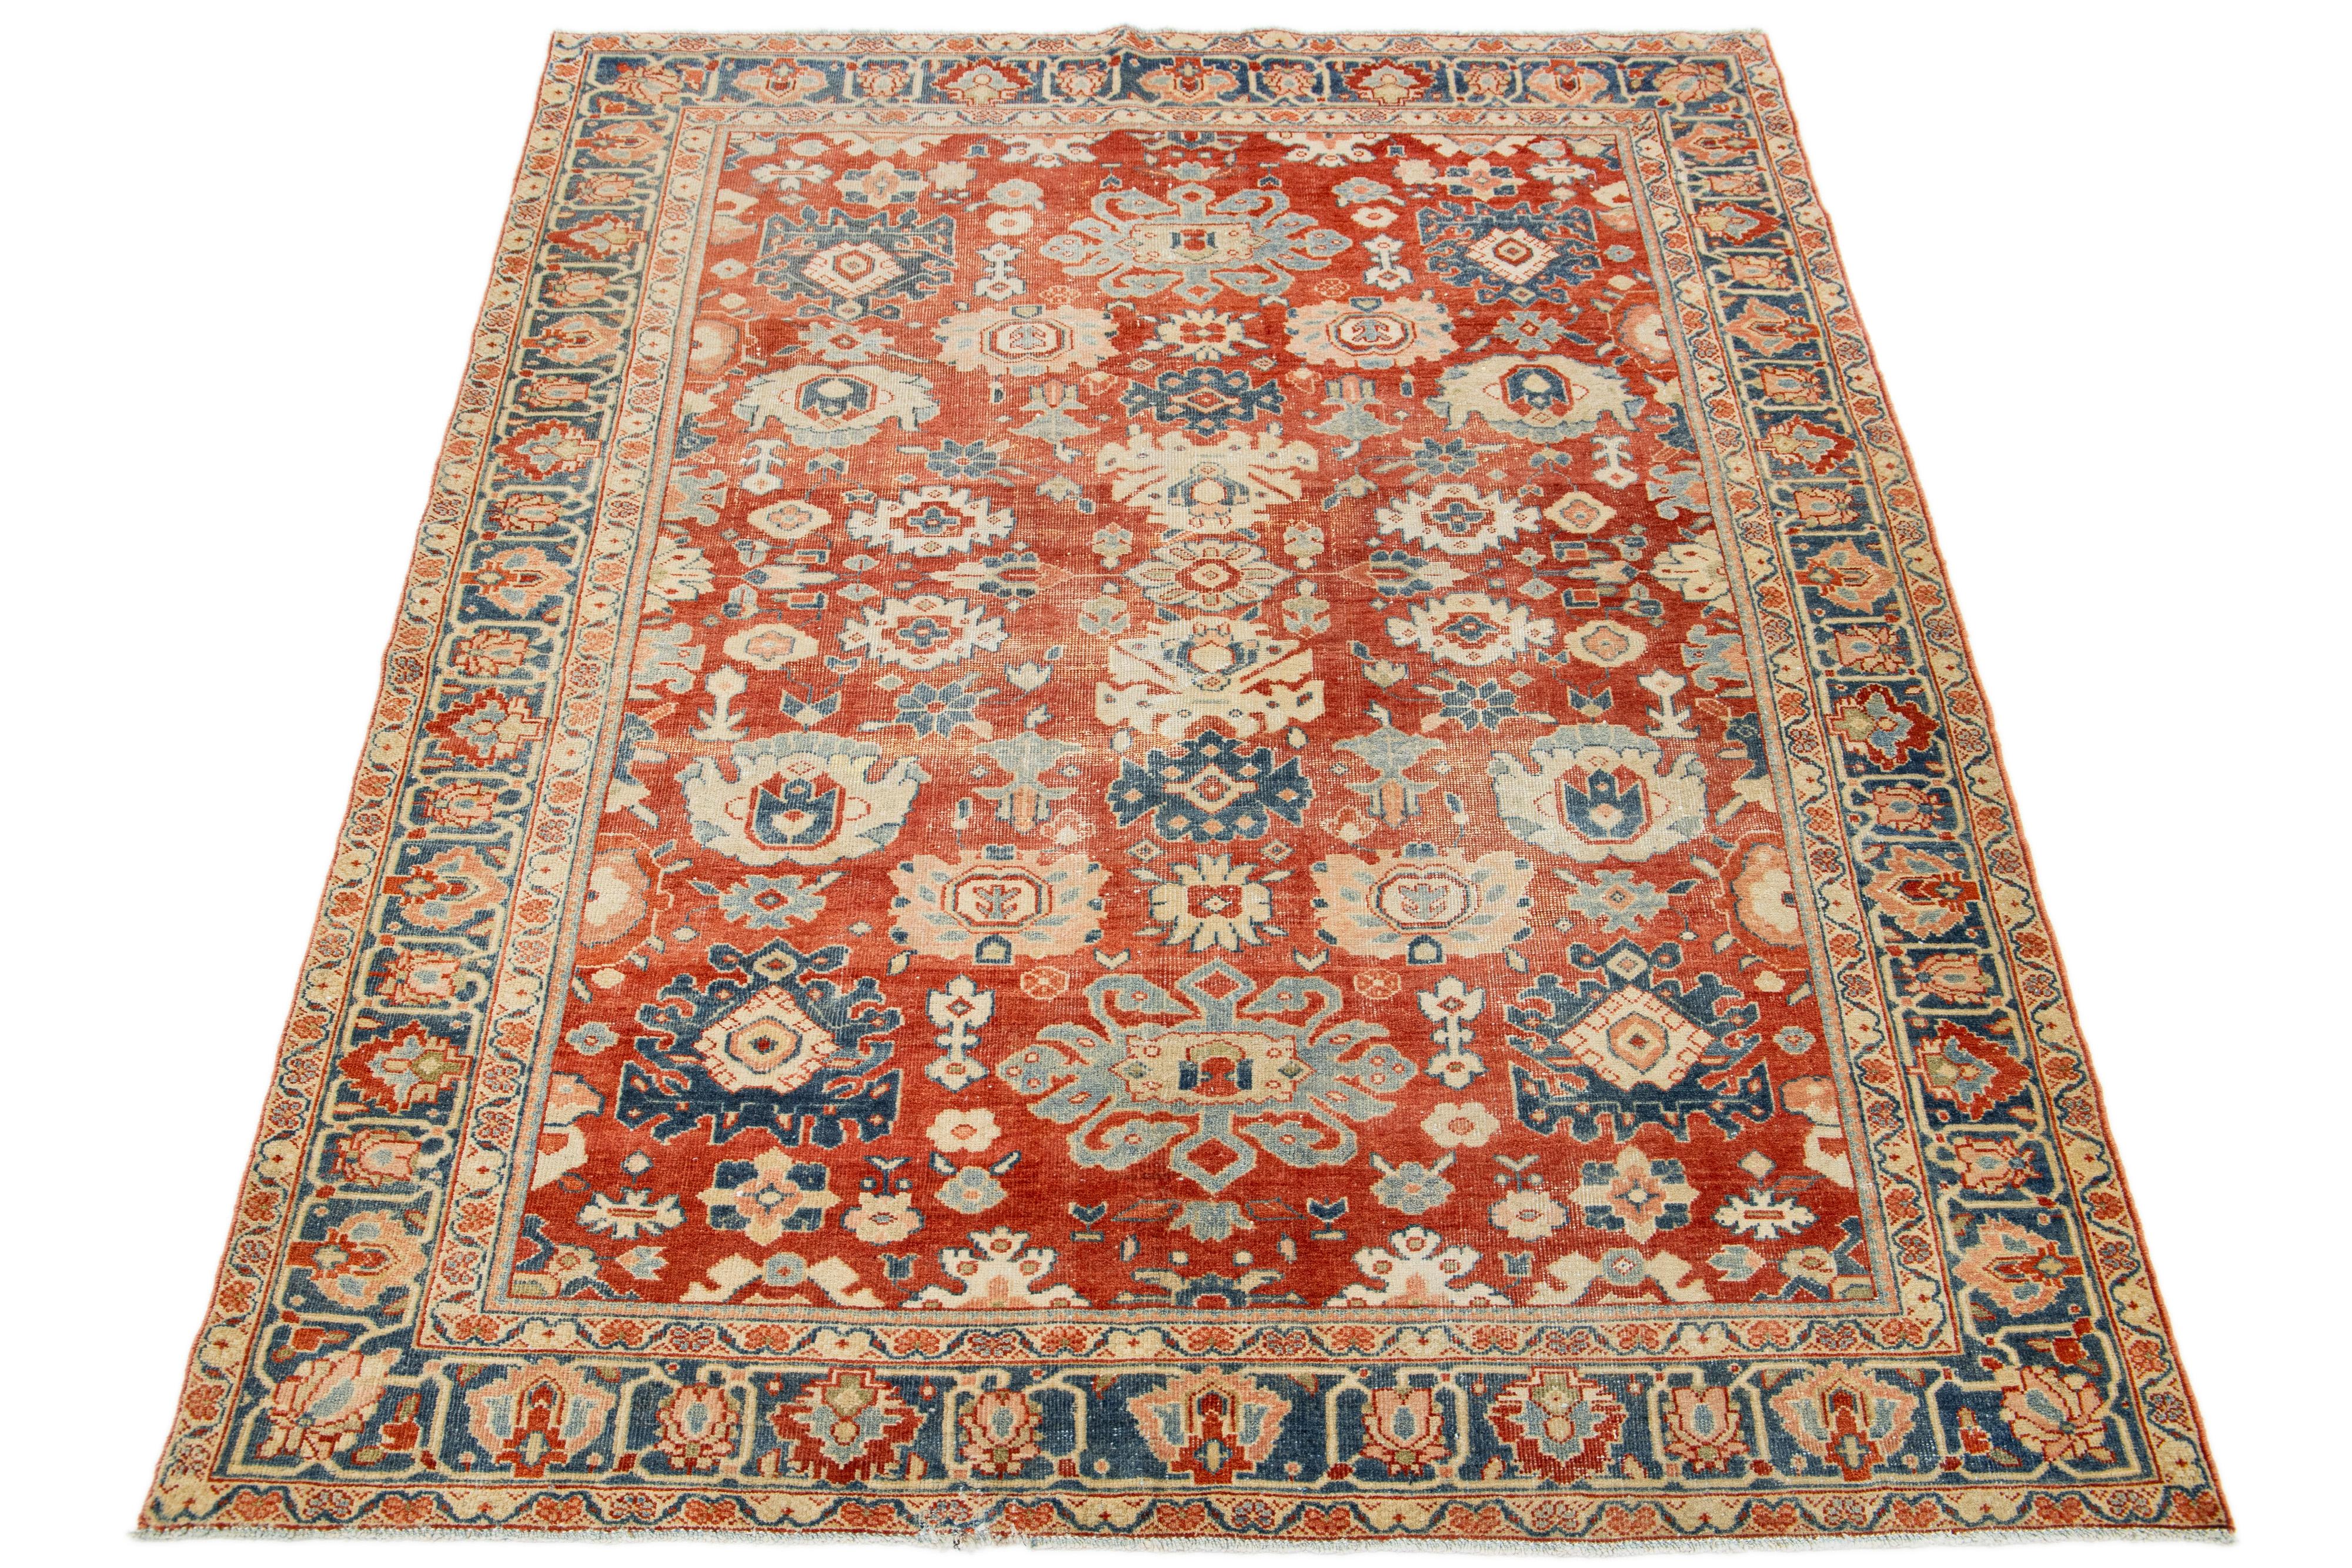 Beautiful Antique Mahal hand-knotted wool rug with a red-rust color field. This Persian rug has blue, peach, and beige hues throughout the allover floral motif.

This rug measures 5'11